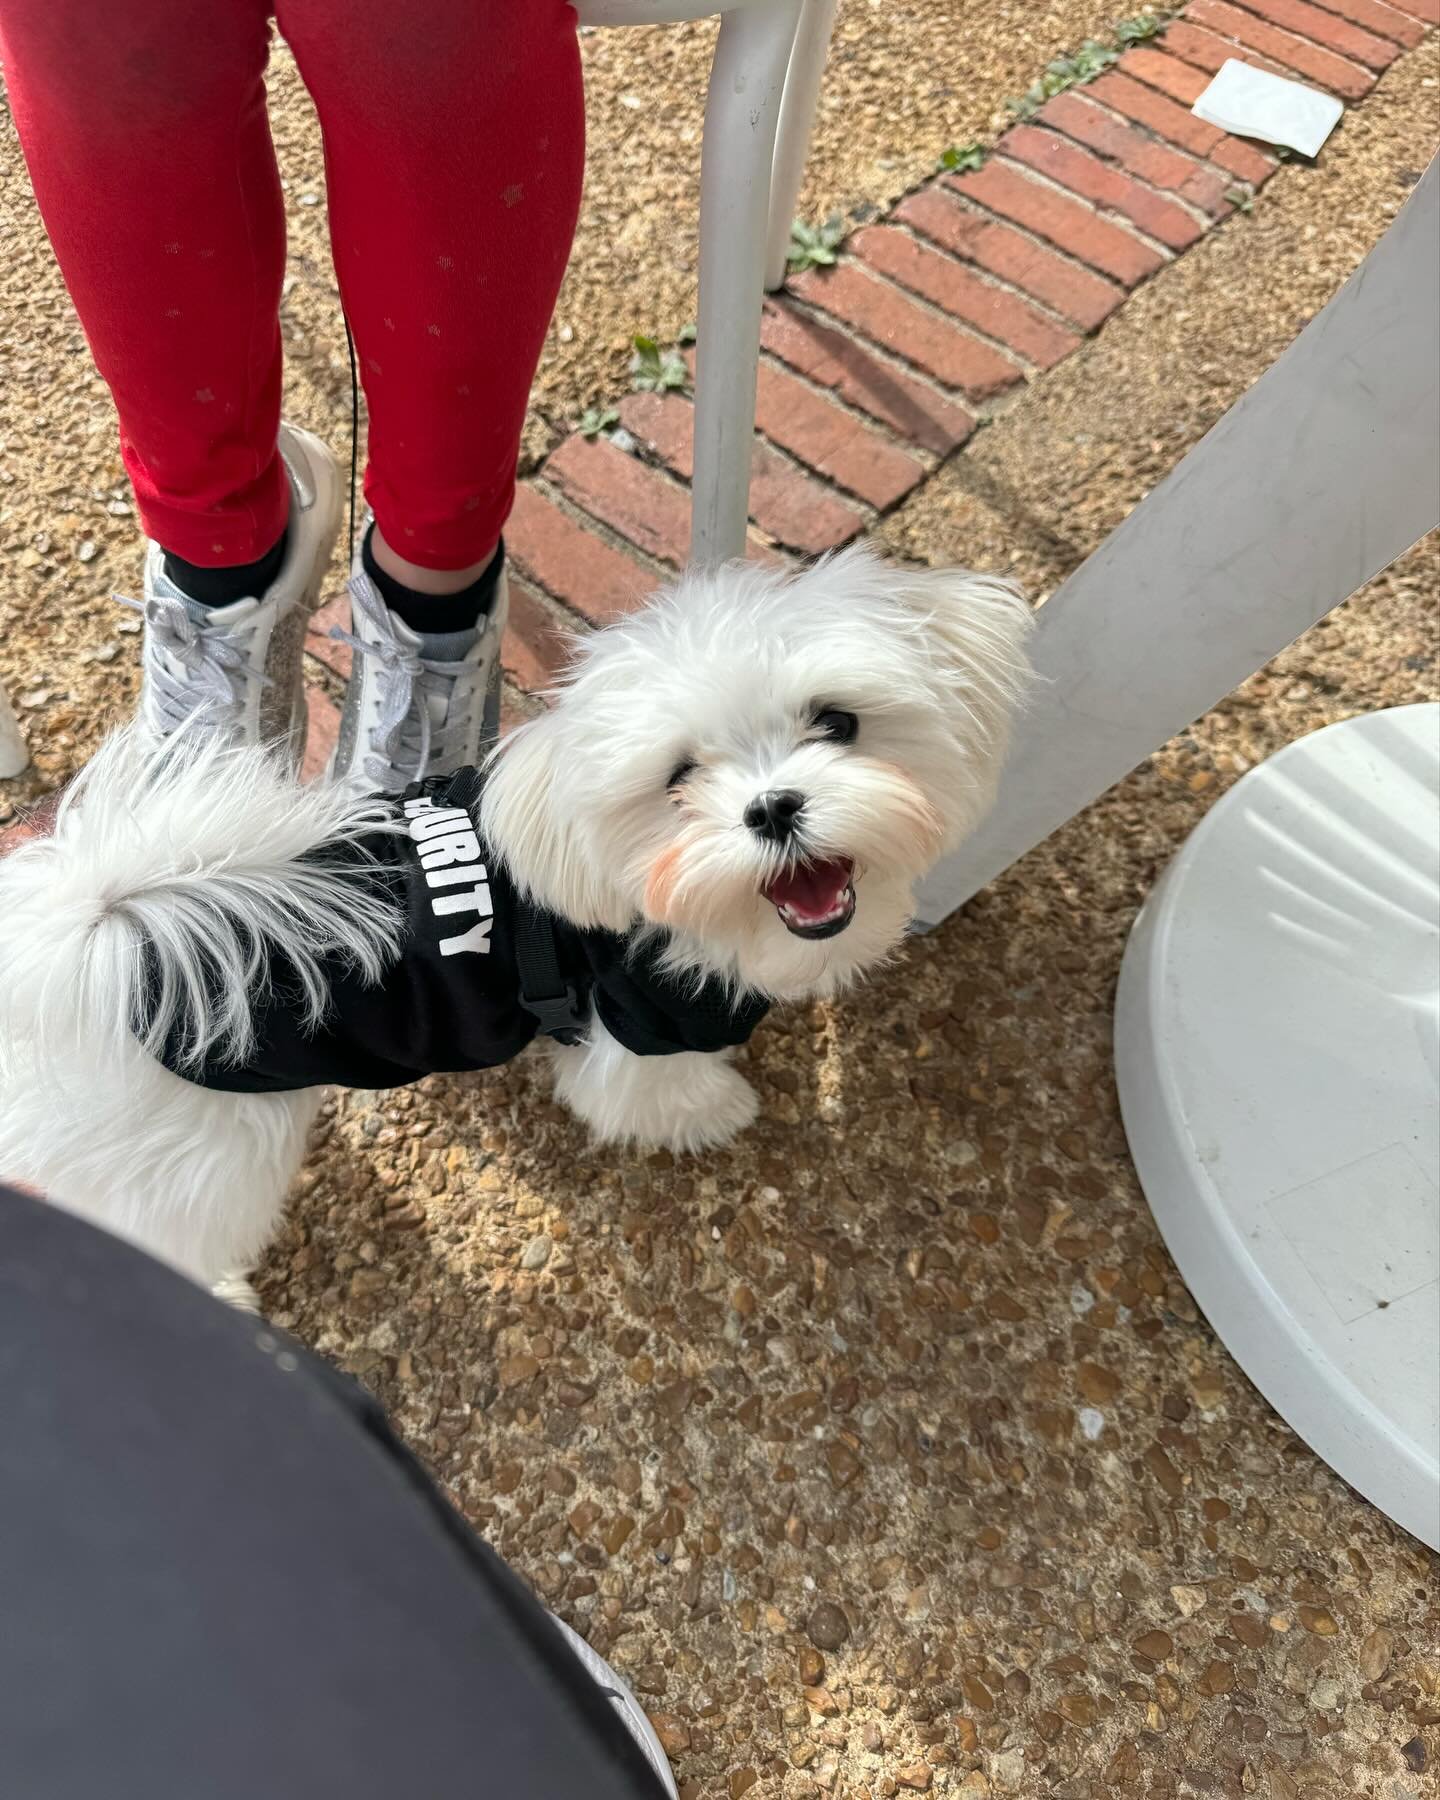 Happy Friday from Maverick the Maltese! We did security in Car Pool line and a watched over the kiddos while they had Frozen Yogurt! We love how much this little buddy loves to meet new people and get &ldquo;scratchies&rdquo; and &ldquo;belly rubs!&r